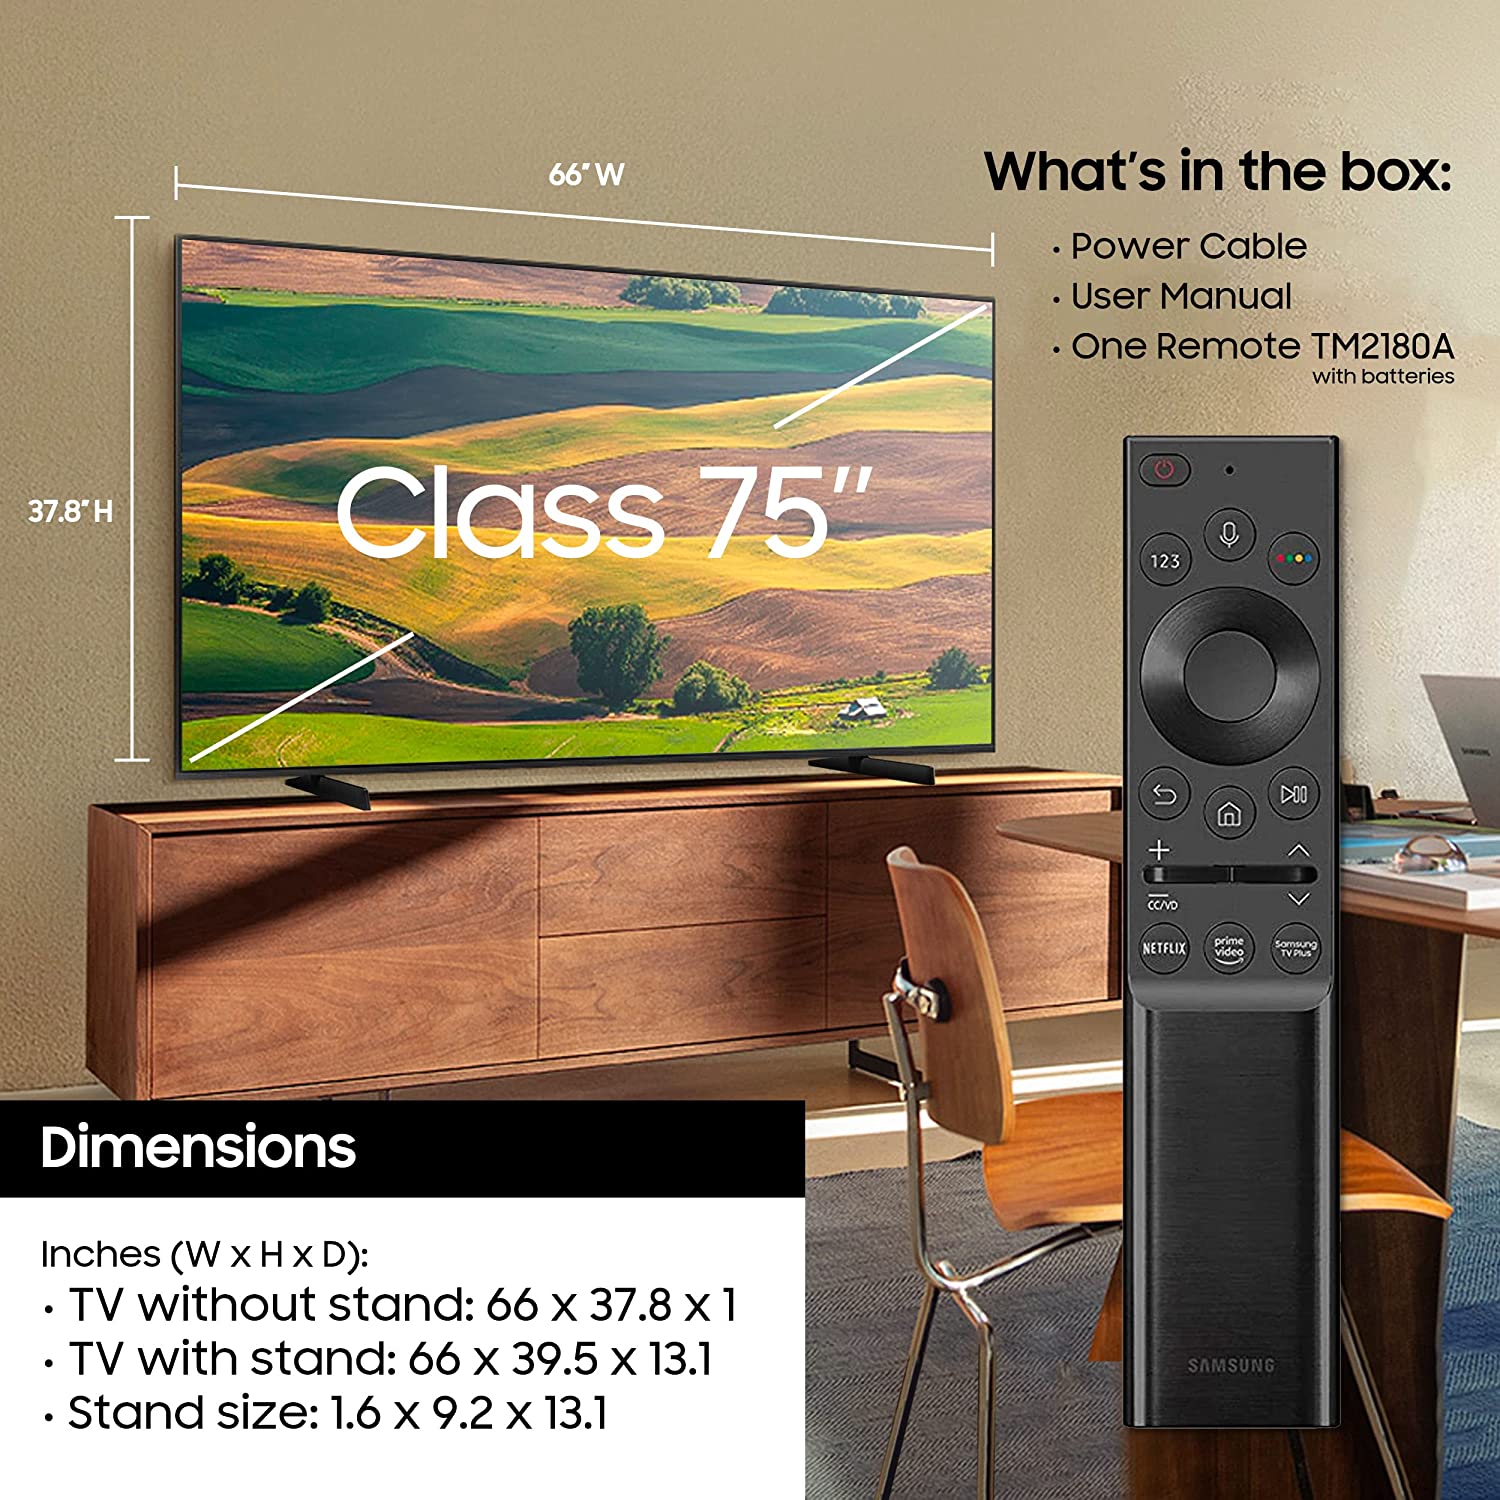 Crystal 4K UHD AU8000 Series HDR, 3 HDMI Ports, Motion Xcelerator, Tap View, PC on TV, Q Symphony, Smart TV with Alexa Built-In (UN85AU8000FXZA, 2021 Model)